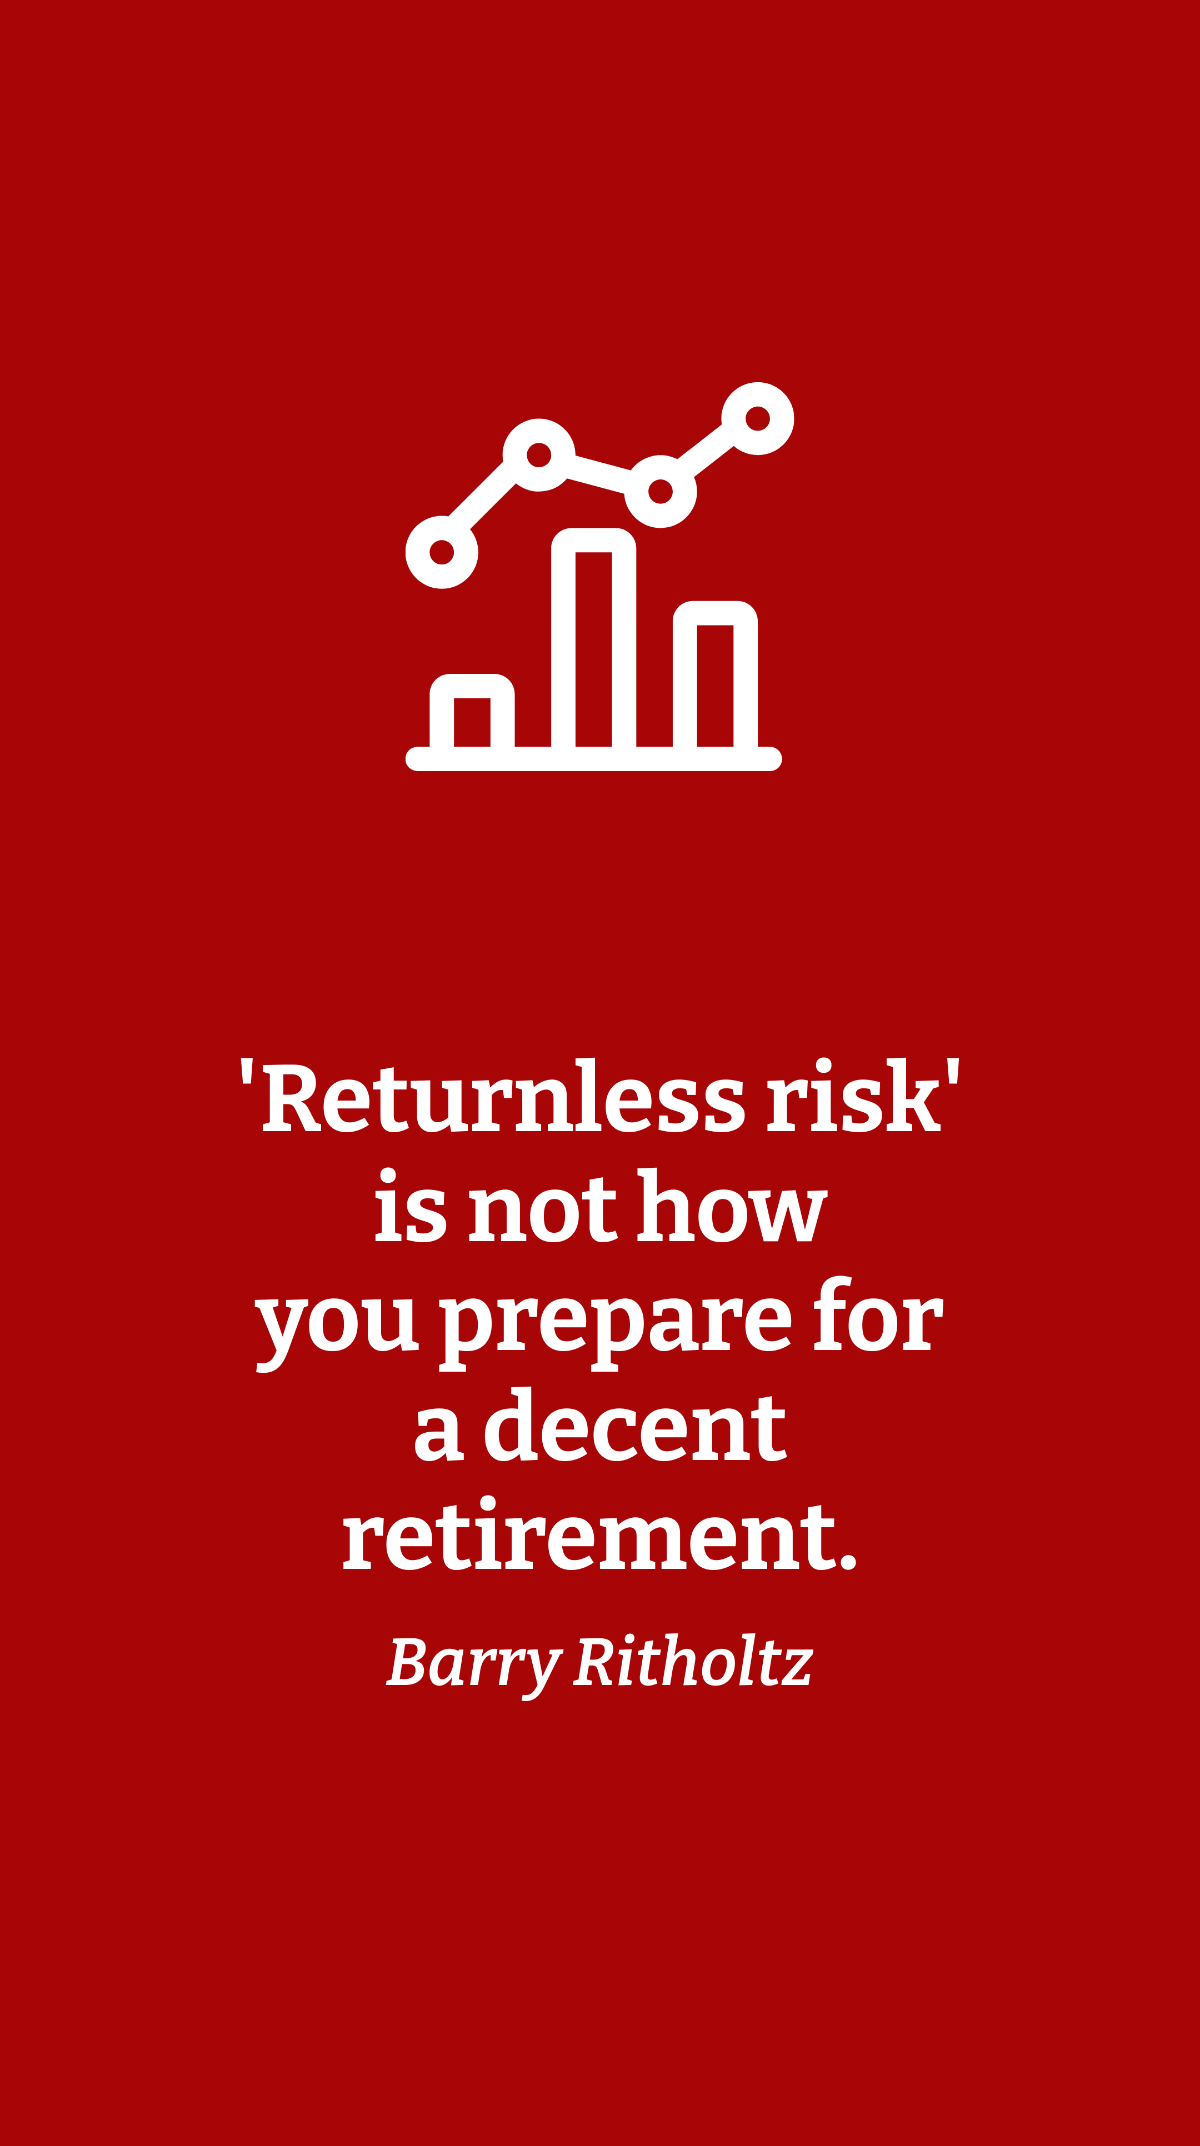 Barry Ritholtz - 'Returnless risk' is not how you prepare for a decent retirement.